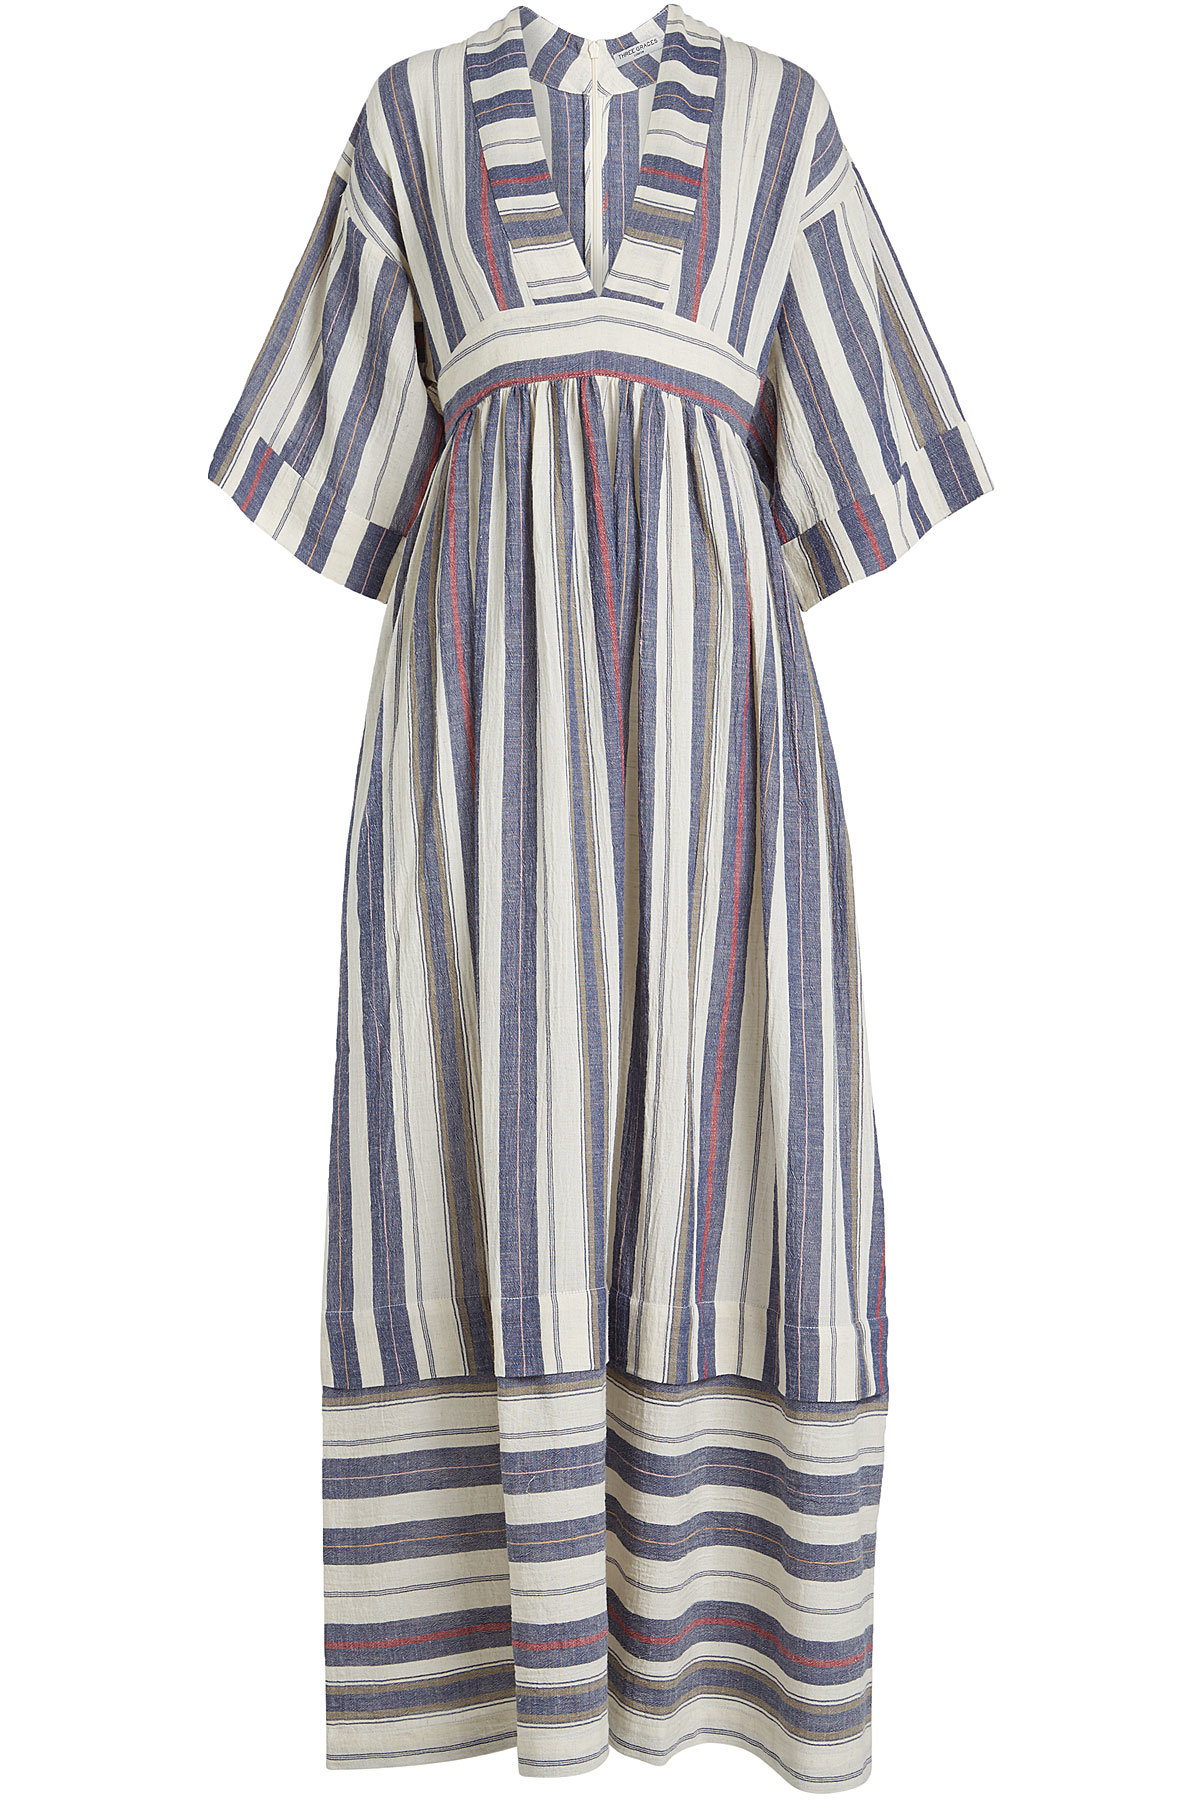 Ferrers Cotton Dress by Three Graces